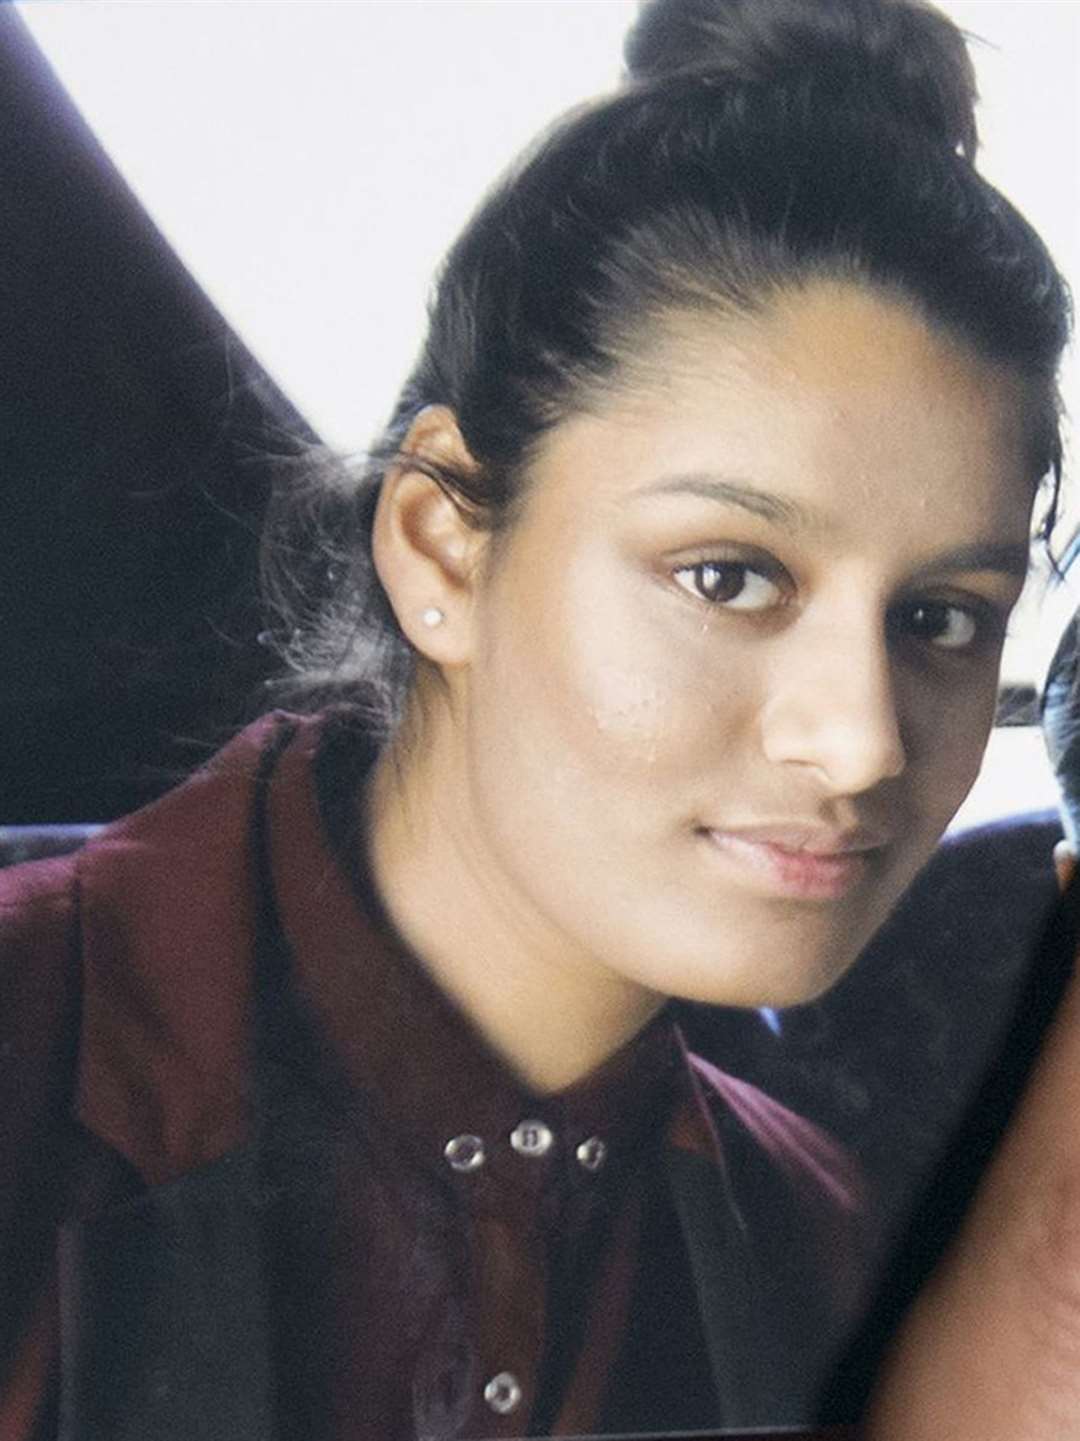 Shamima Begum was 15 when she travelled to Syria (PA)